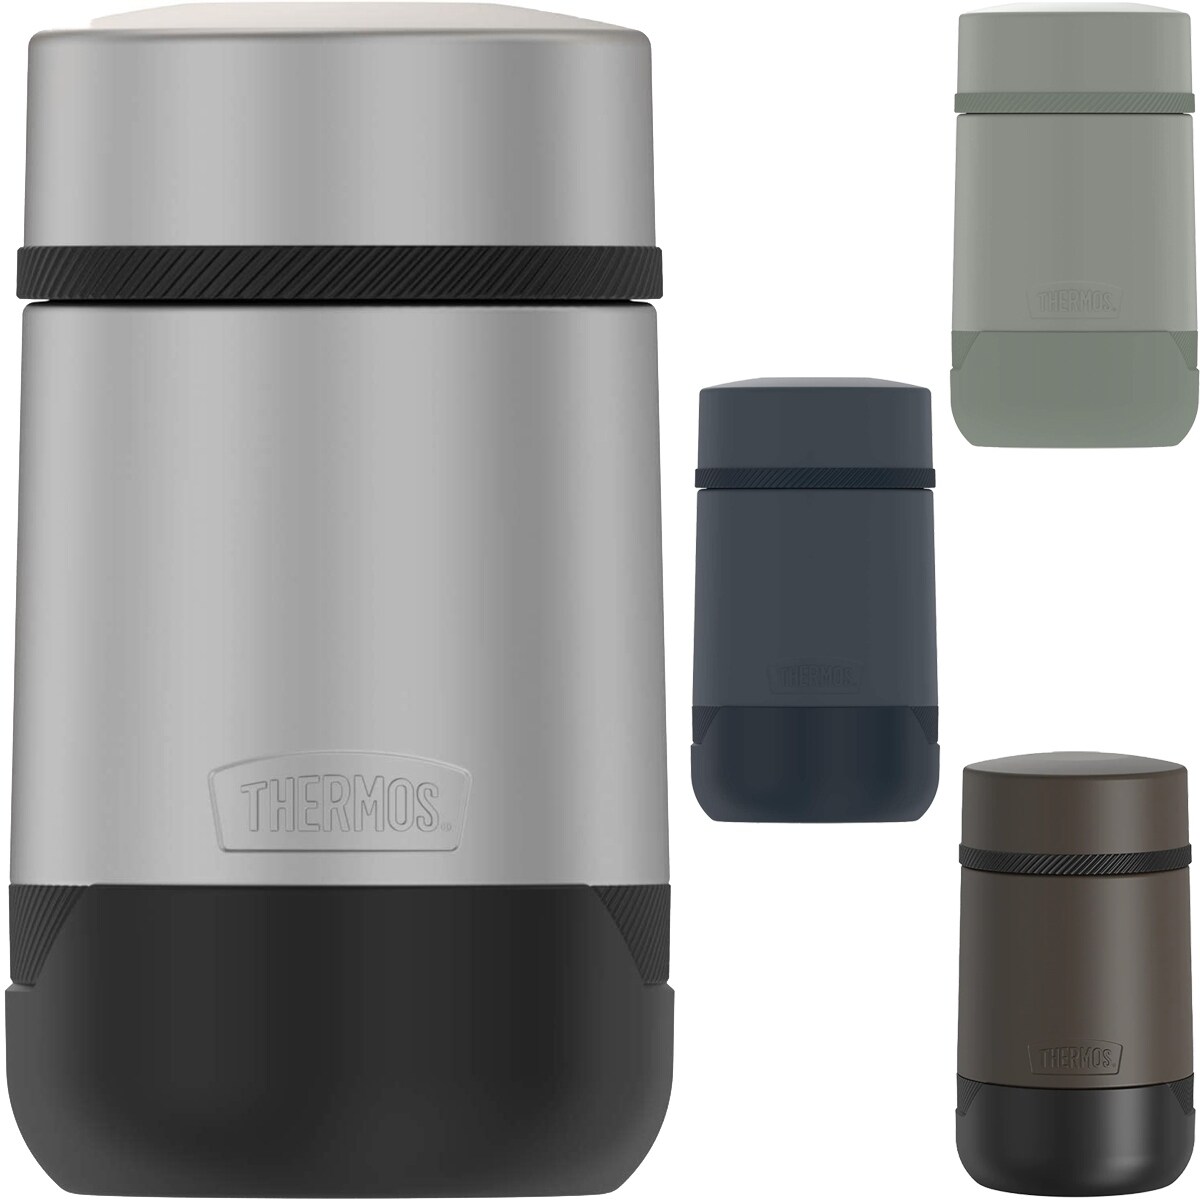 https://ak1.ostkcdn.com/images/products/is/images/direct/b1008a0ea4dcb8d97c80f8c0925e31c4f9263295/Thermos-18-oz.-Guardian-Collection-Insulated-Stainless-Steel-Food-Jar.jpg